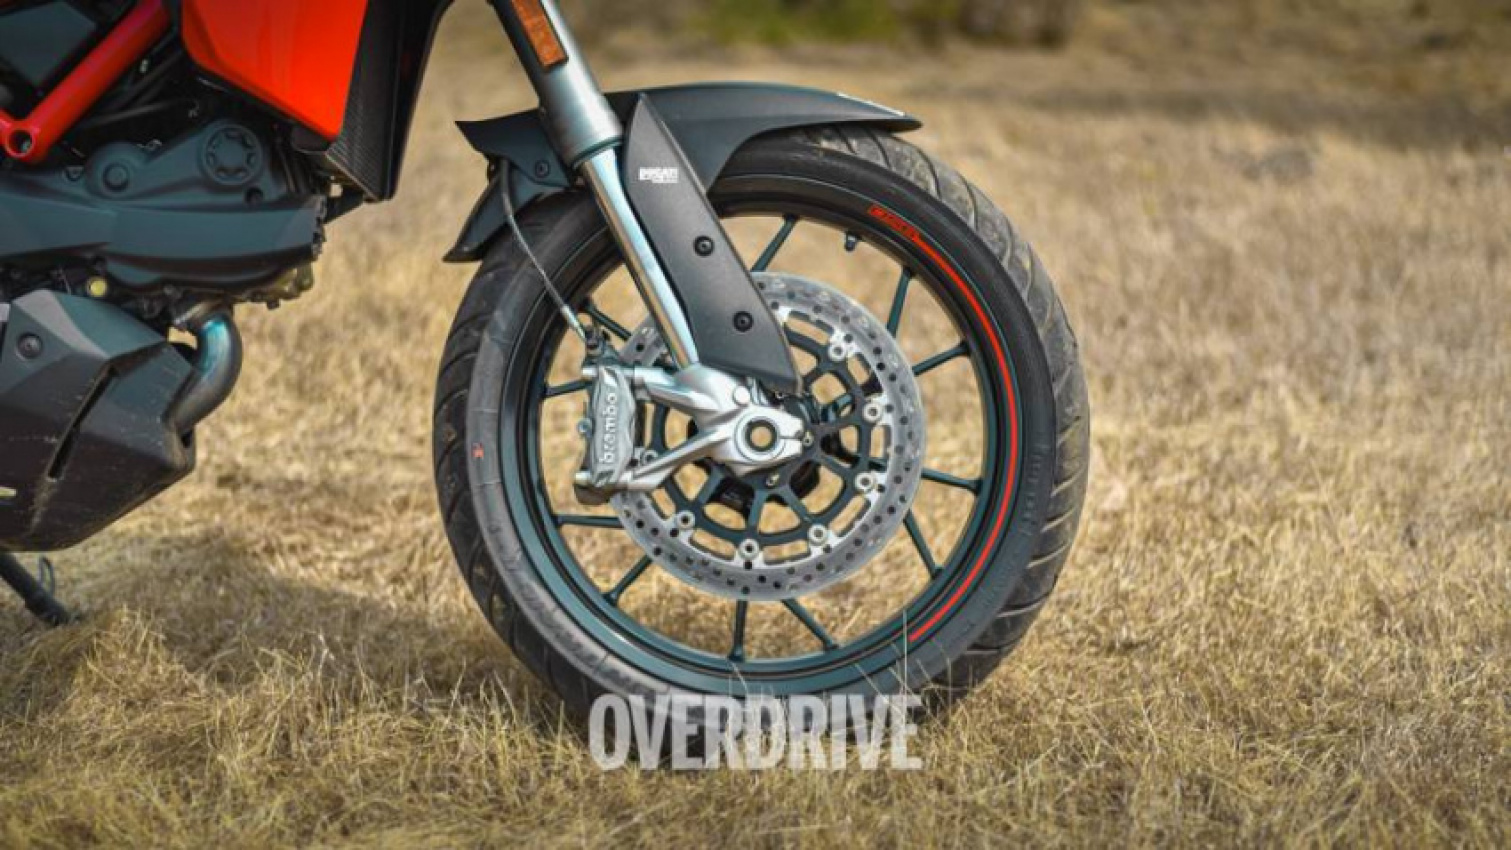 autos, cars, ducati, 2020 ducati multistrada 950 s, 2021 ducati multistrada 950 s, 2021 ducati multistrada v4, ducati multistrada, ducati multistrada 950, ducati multistrada 950 review, ducati multistrada 950 road test, ducati multistrada 950 s, ducati multistrada 950s, ducati multistrada review, ducati multistrada v4, ducati multistrada v4 2021, ducati multistrada v4 review, ducati multistrada v4 sound, multistrada, multistrada 950, new 2021 ducati multistrada 950 s highlight, new ducati multistrada v4, overdrive, review, road test, 2021 ducati multistrada 950s road test review - the fast, red italian is worth every penny!